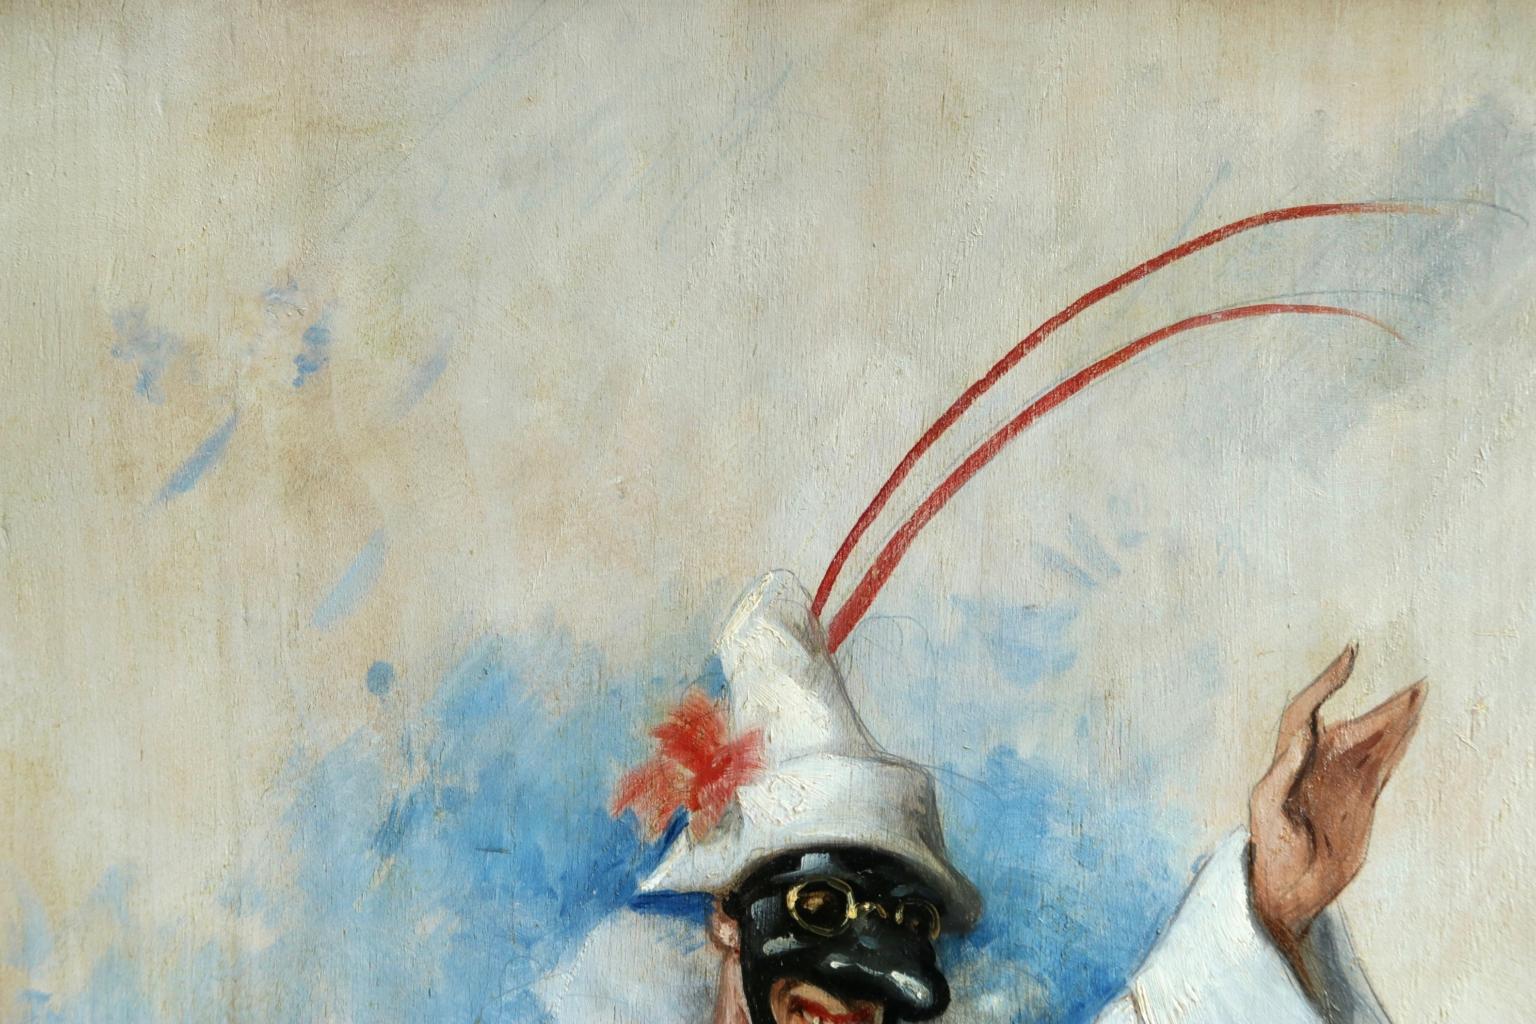 Oil on panel circa 1880 by French painter, Alfred Choubrac depicting a Pulcinella pierrot dressed in white with a black mask and red scarf. Signed and dedicated lower right. Unframed dimensions 32